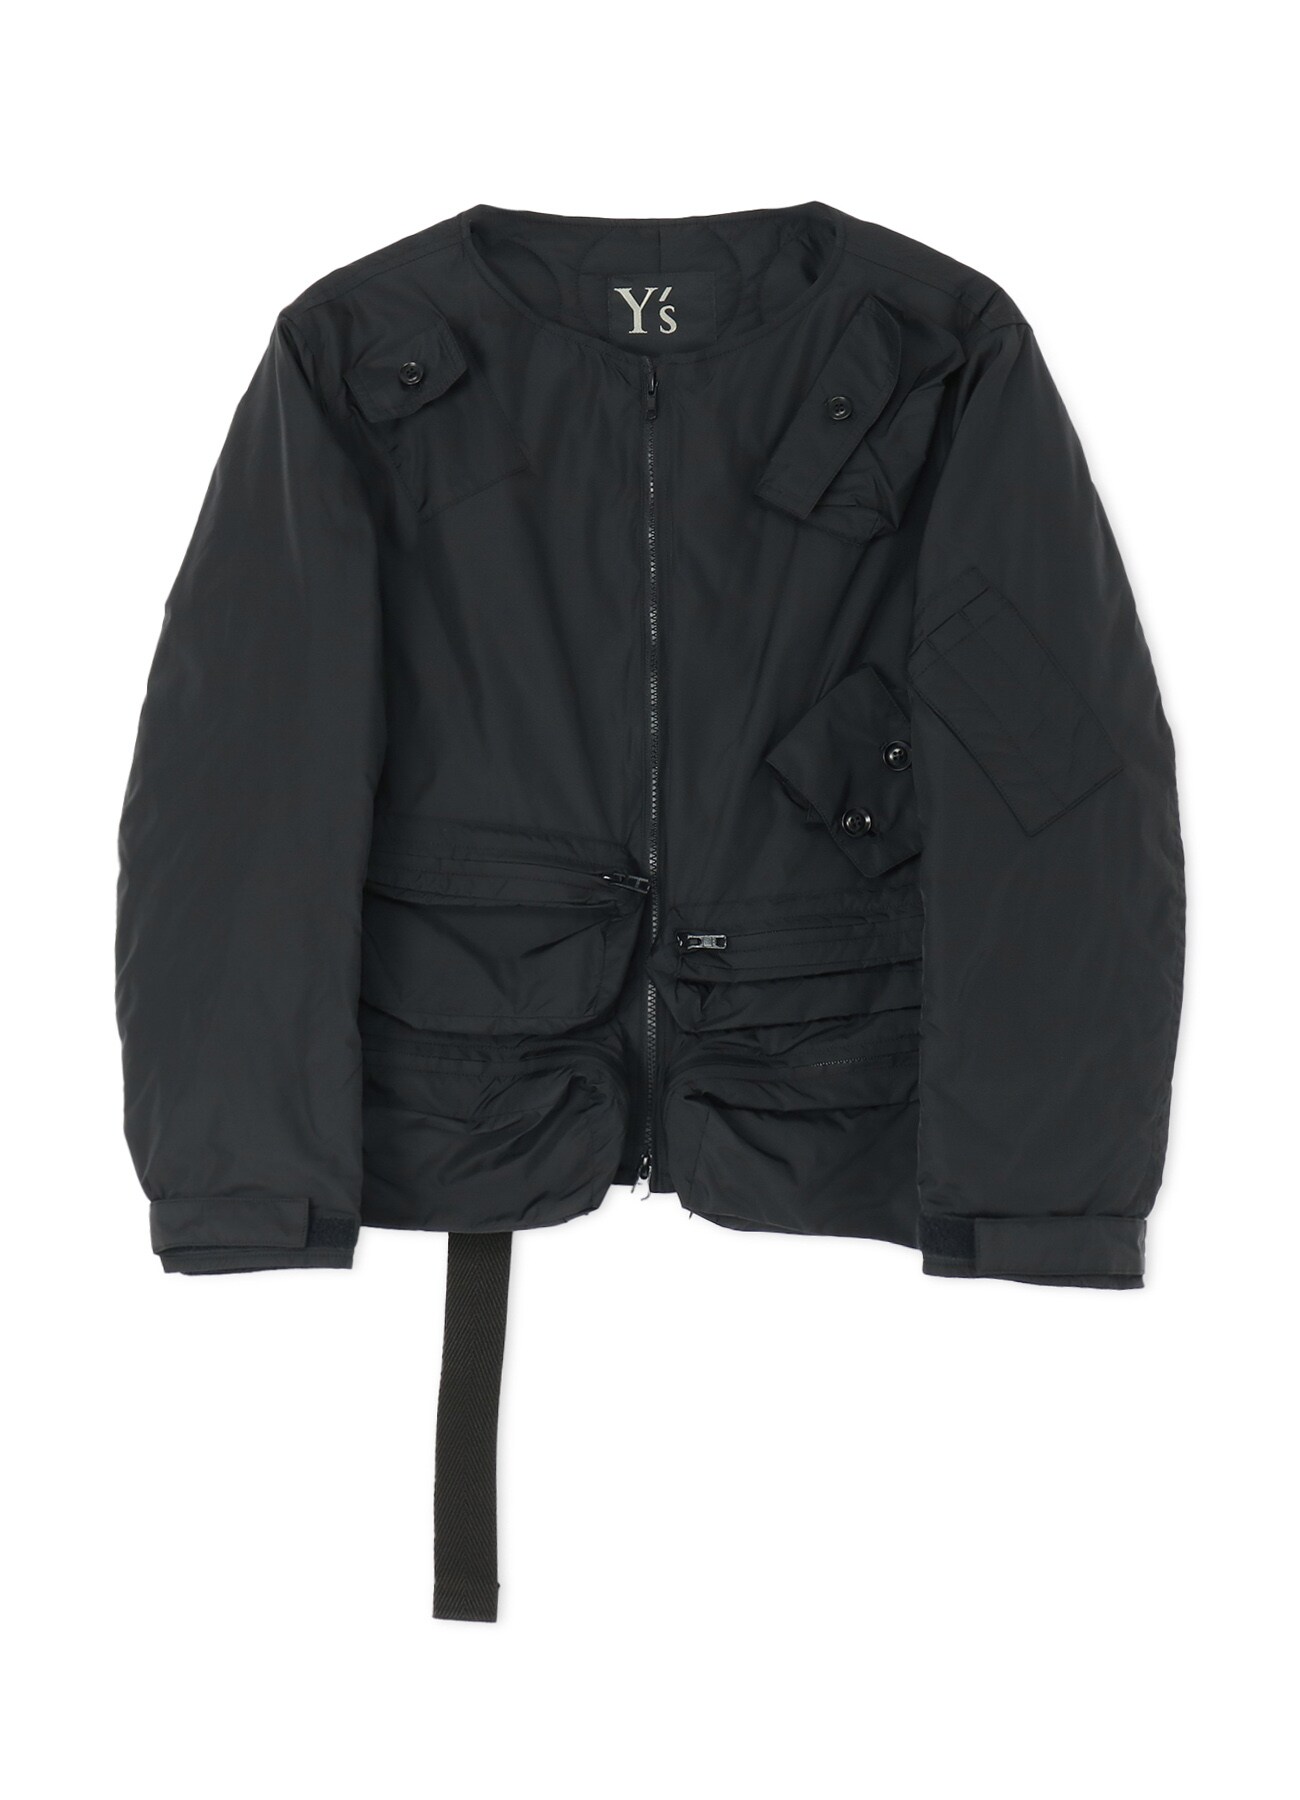 OUTERWEAR｜Y's｜【Official】THE SHOP YOHJI YAMAMOTO(2／4ページ)